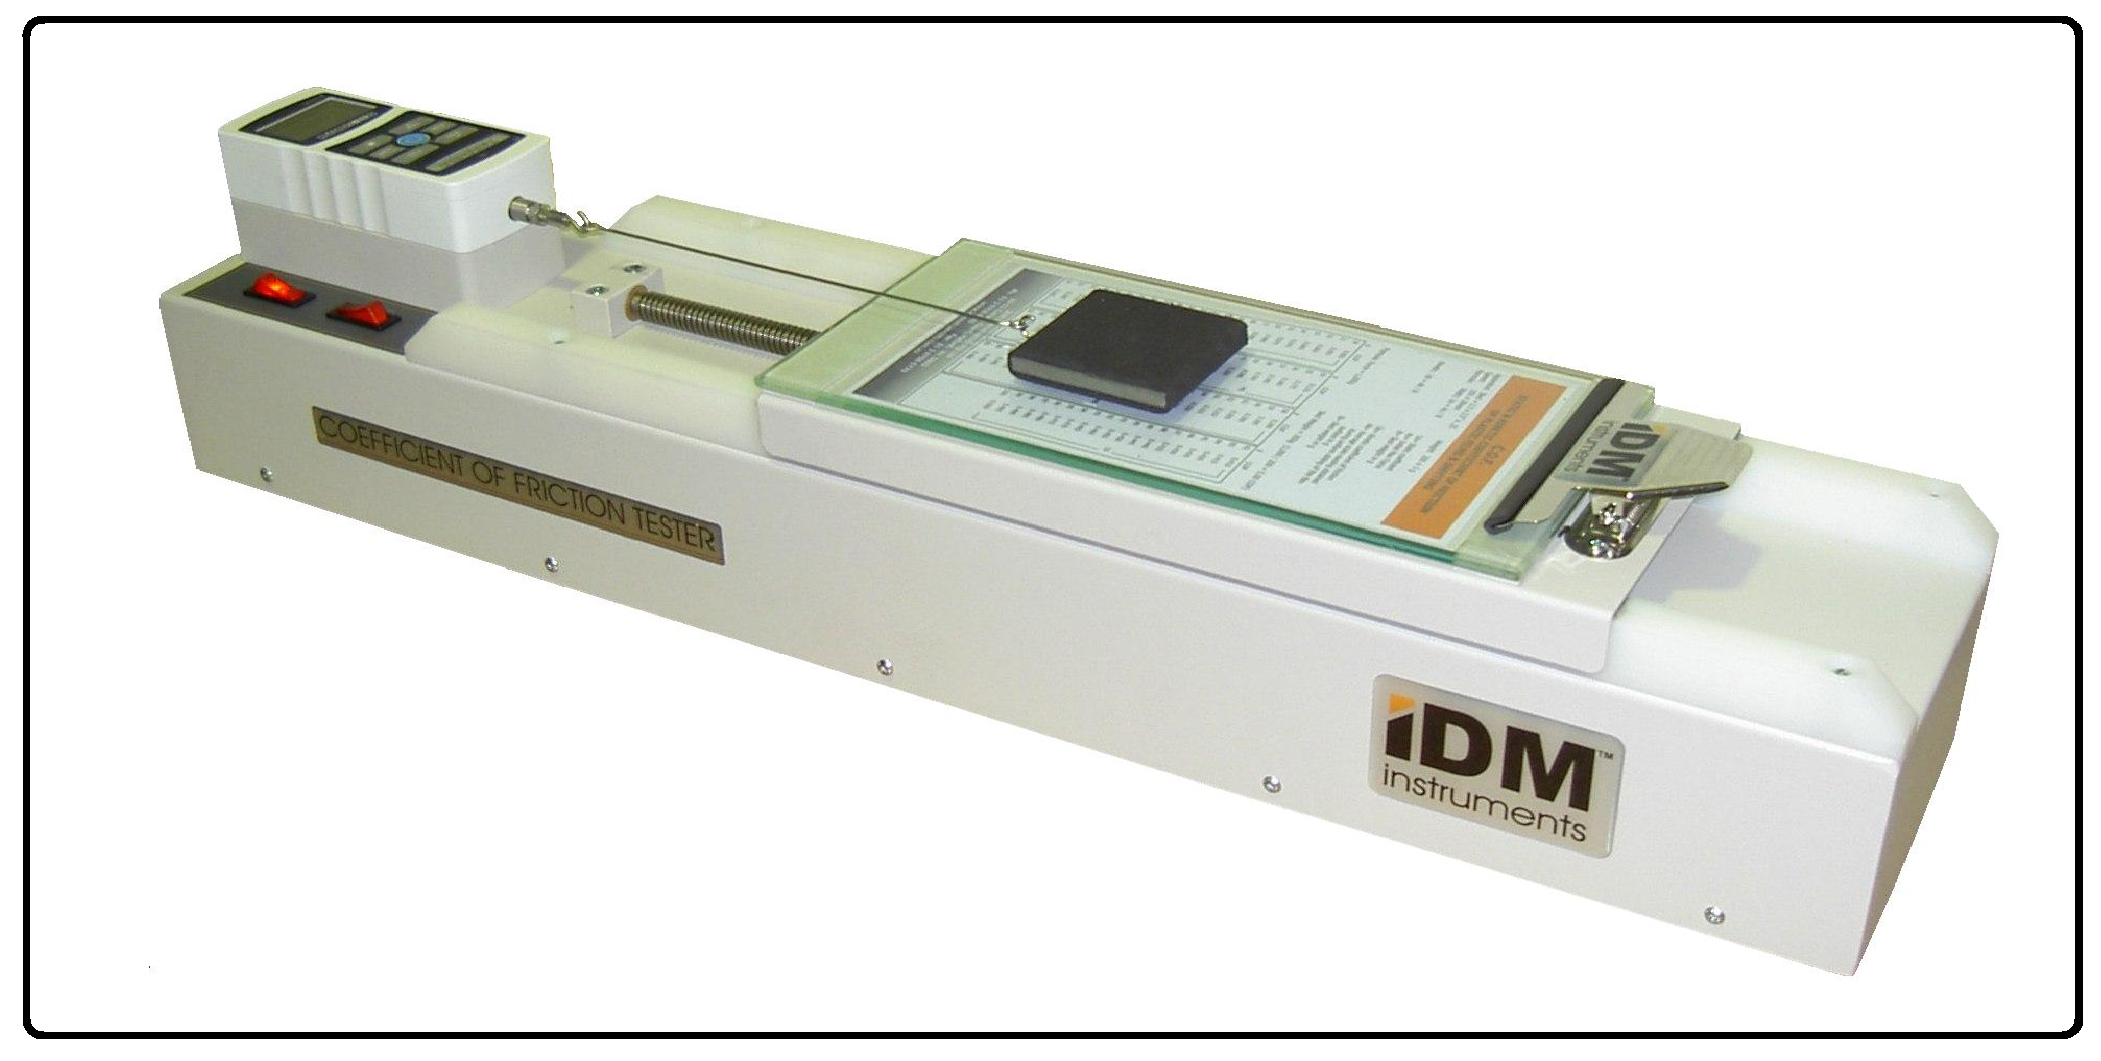 New Fashion Design for Chlorophyll Content Meter - C0008 – Coefficient of Friction Tester – Drick